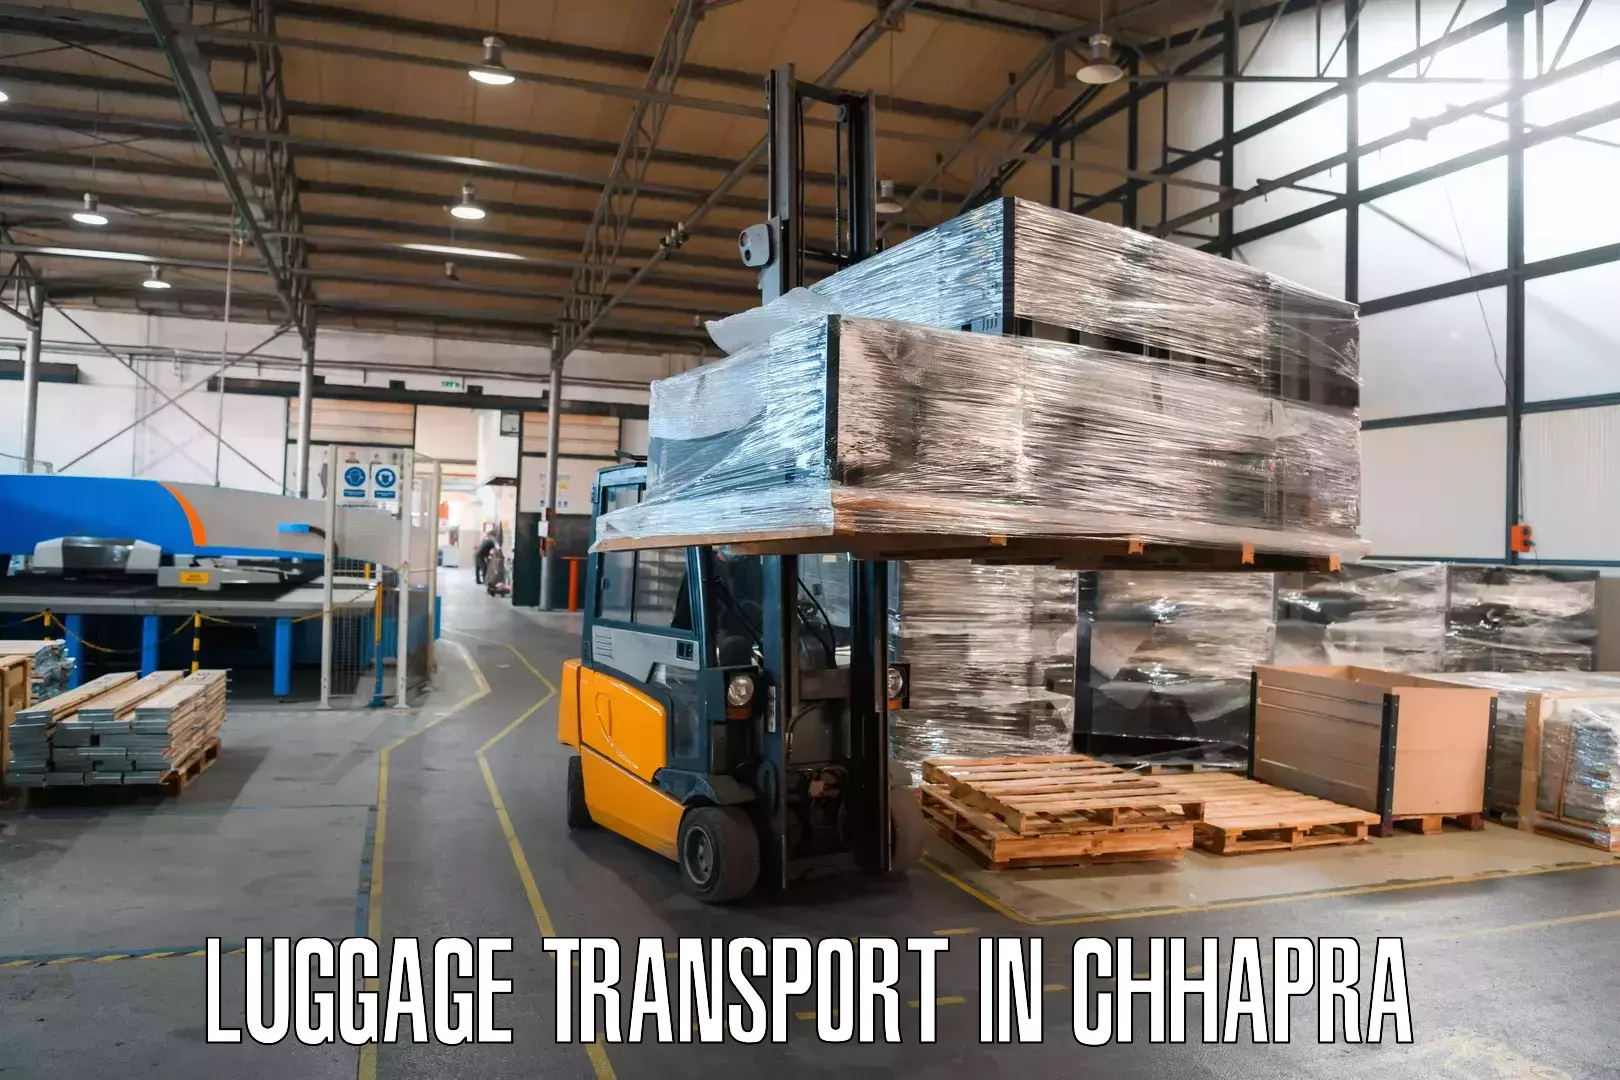 Baggage transport technology in Chhapra